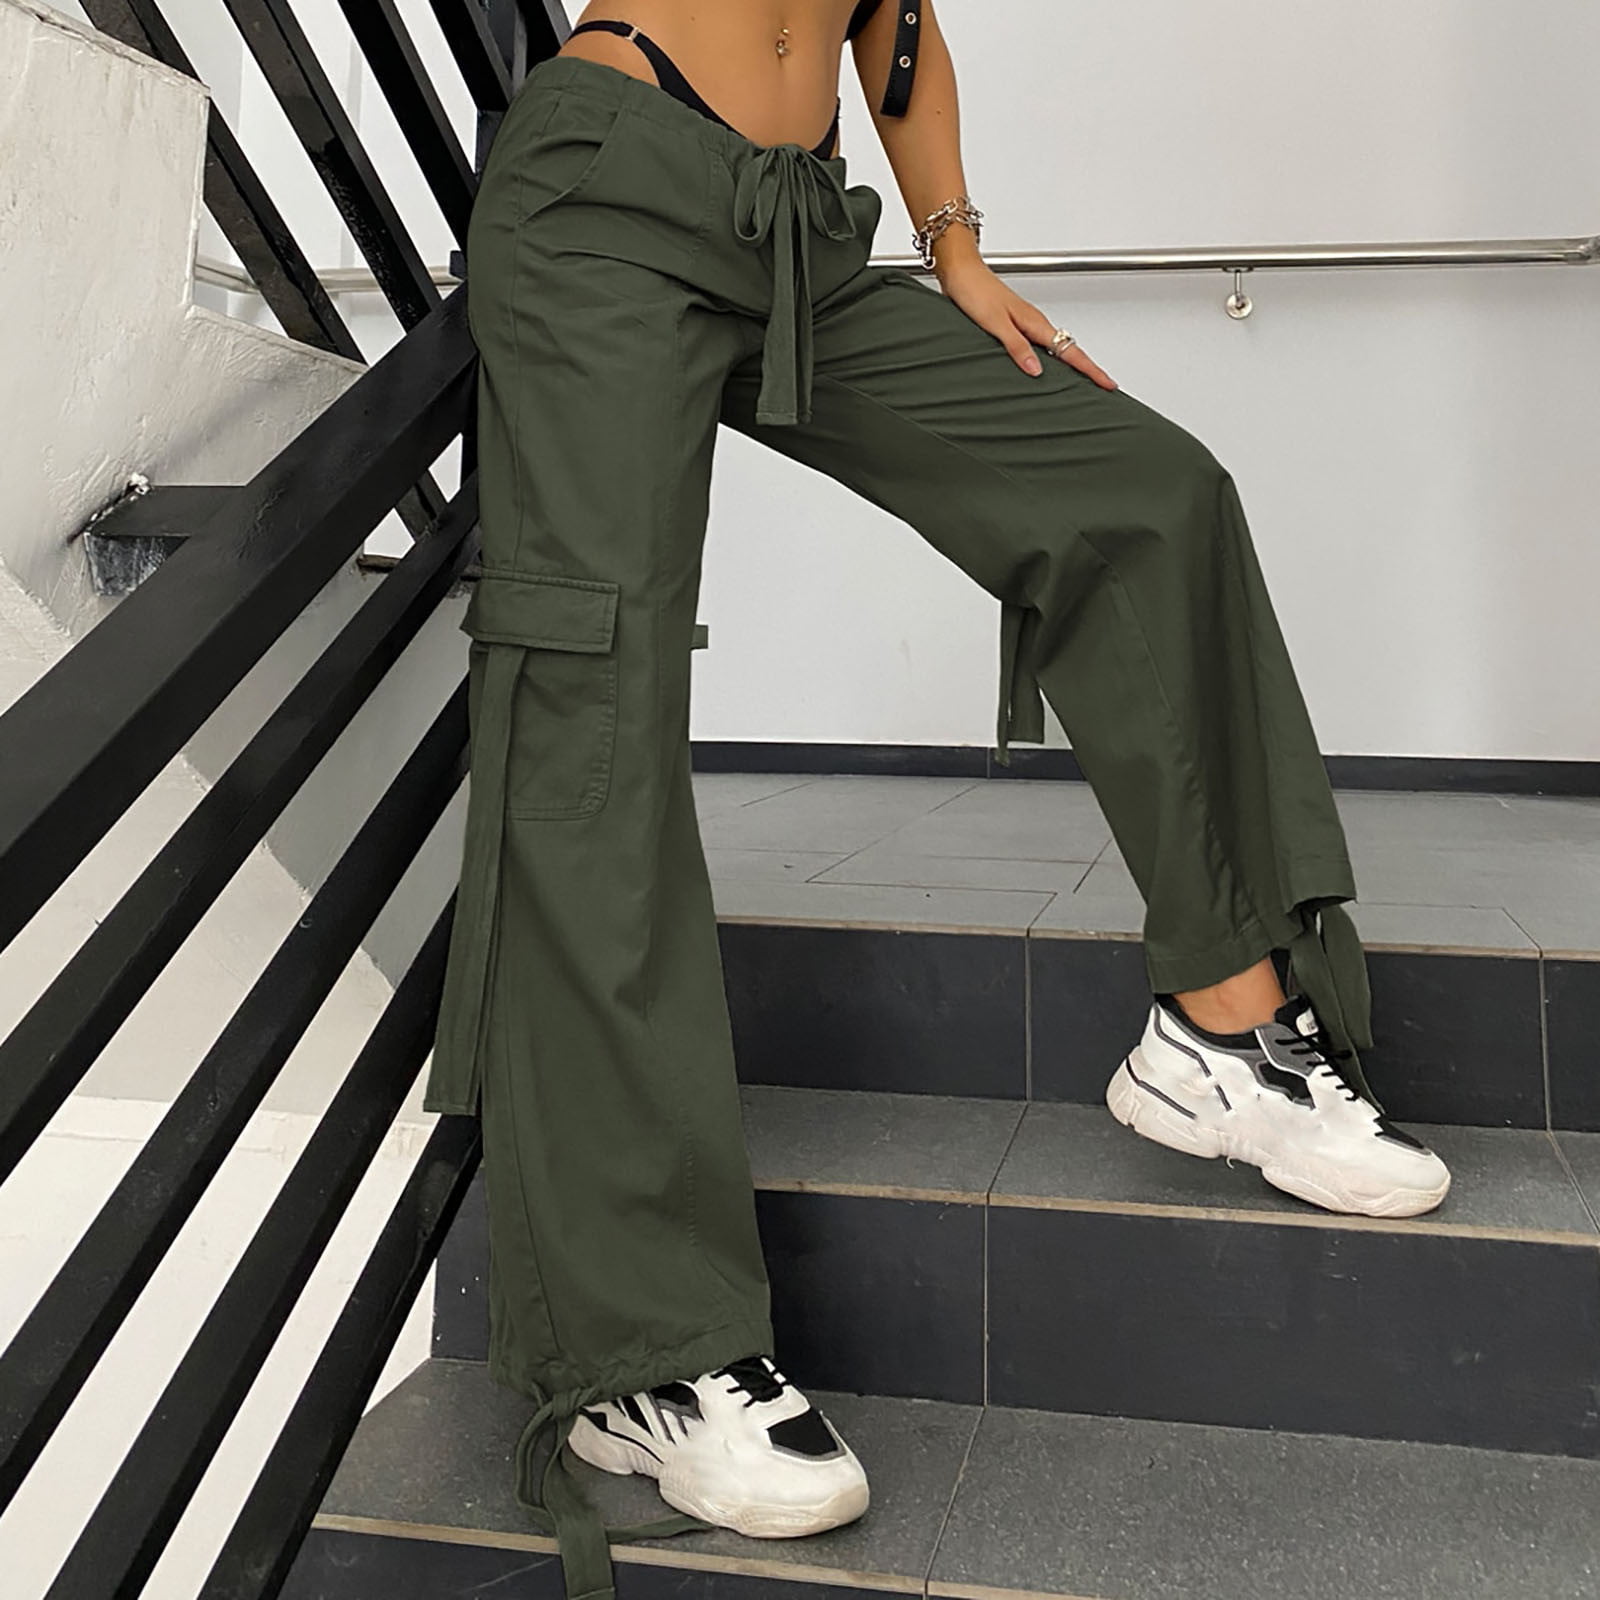 RYRJJ Wide Leg Cargo Pants for Women Low Rise Trousers with Multi-Pockets  Fashion Y2K Streetwear Drawstring Casual Baggy Pants(Army Green,S) 